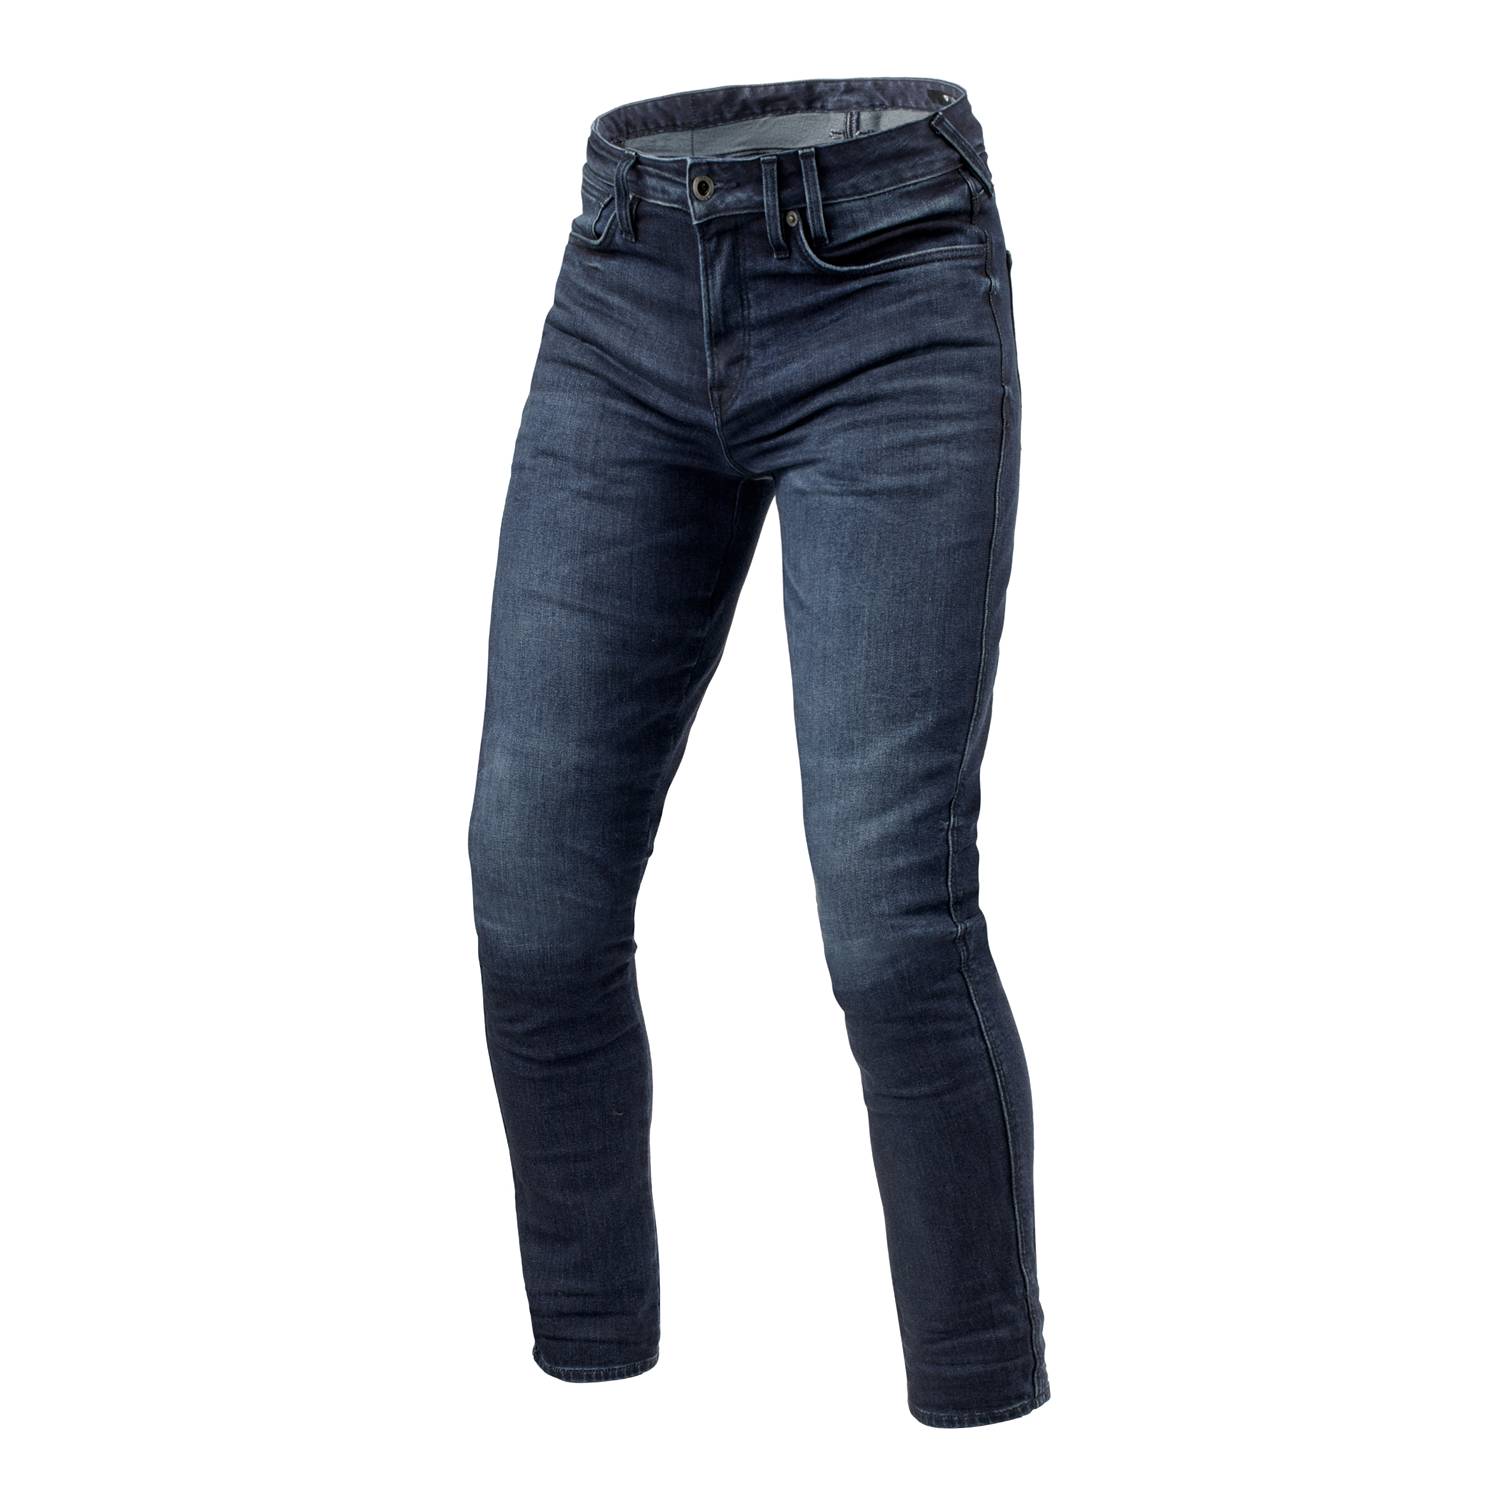 Image of REV'IT! Jeans Carlin SK Dark Blue Used L36 Motorcycle Jeans Size L36/W34 ID 8700001376563